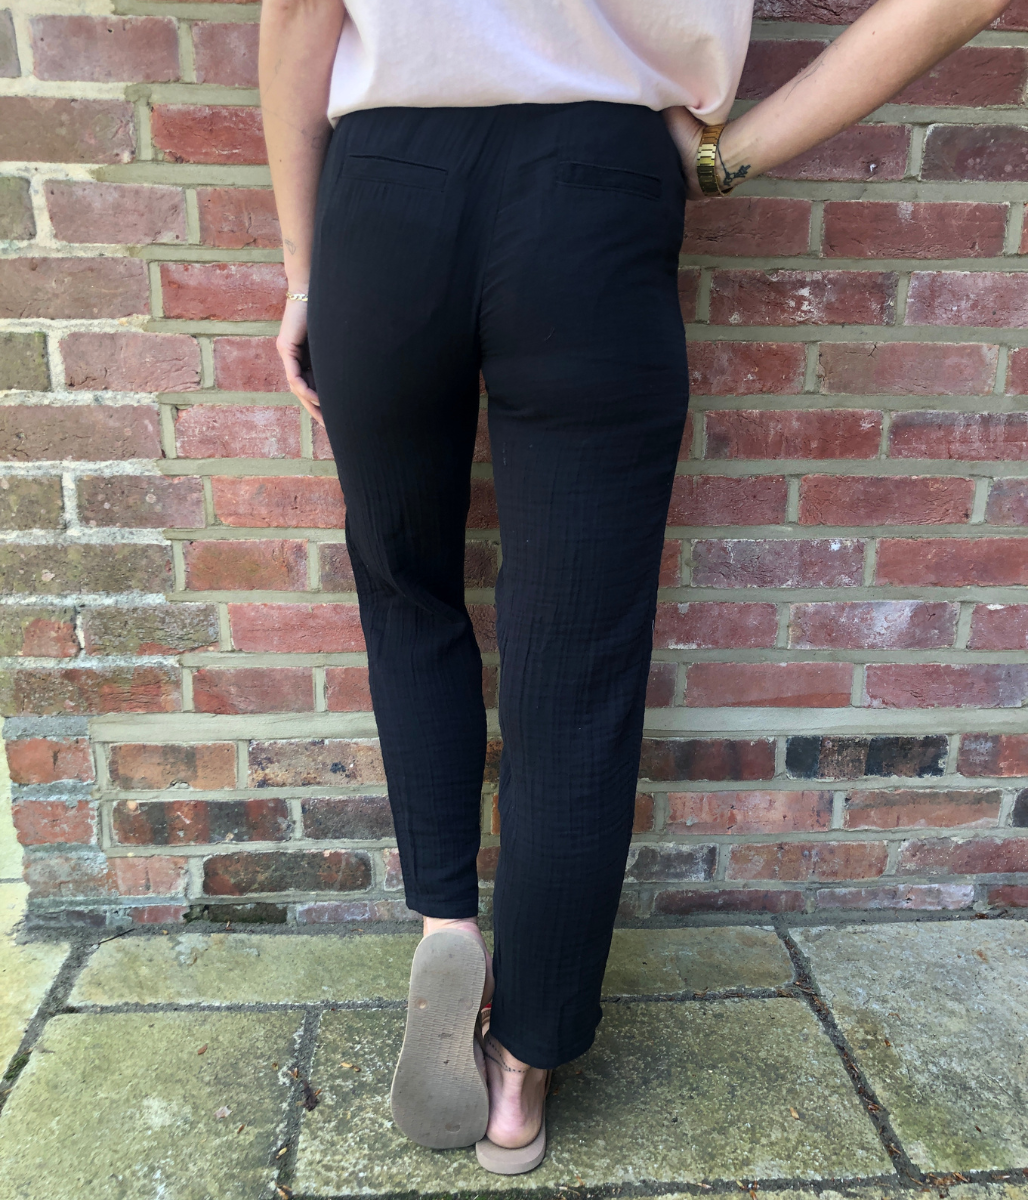 Women's Cotton Tapered Trouser in Black